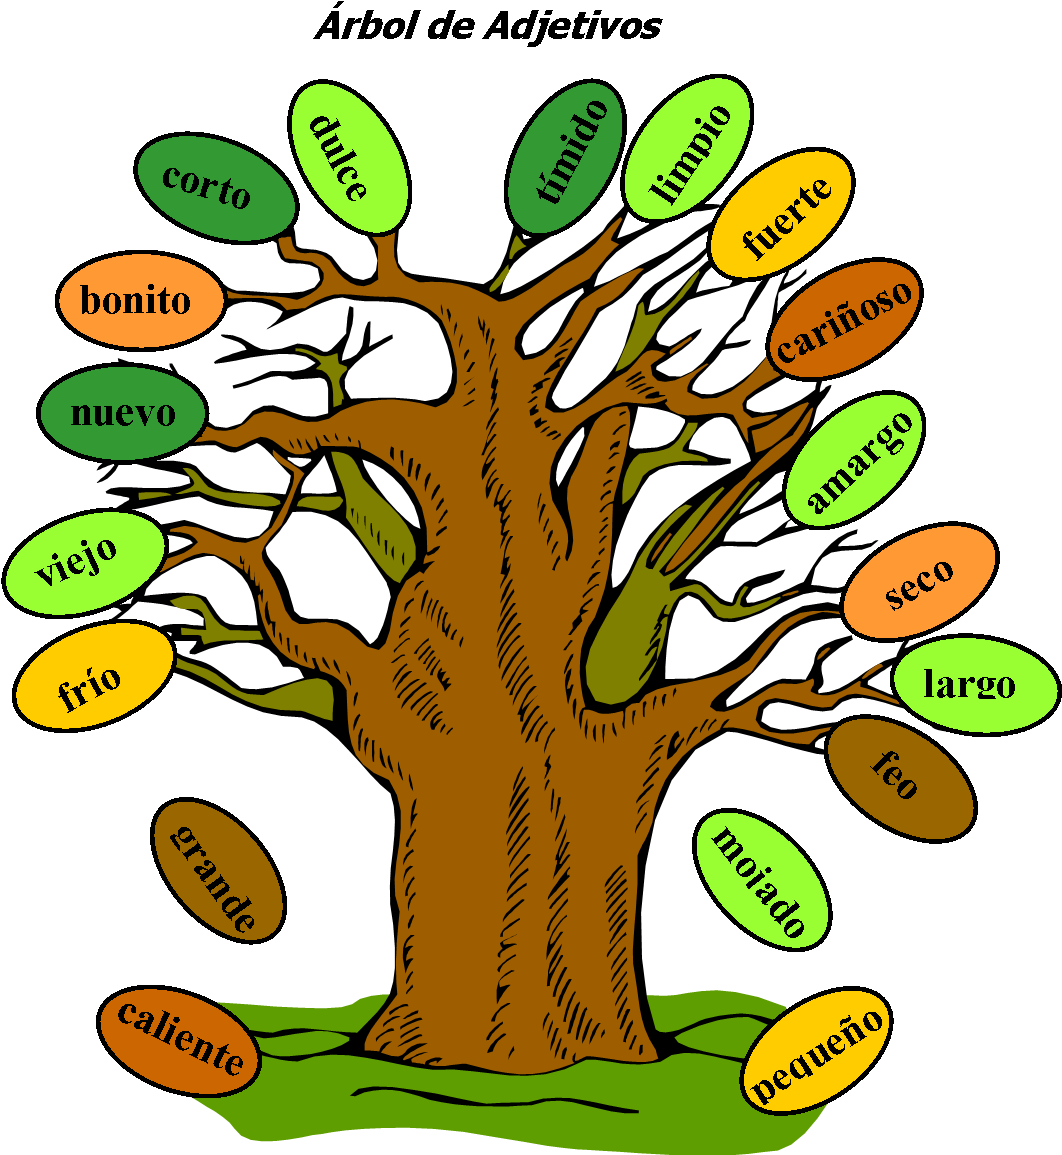 Tree Of Spanish Adjectives - Descriptive Words For Trees (1076x1159)